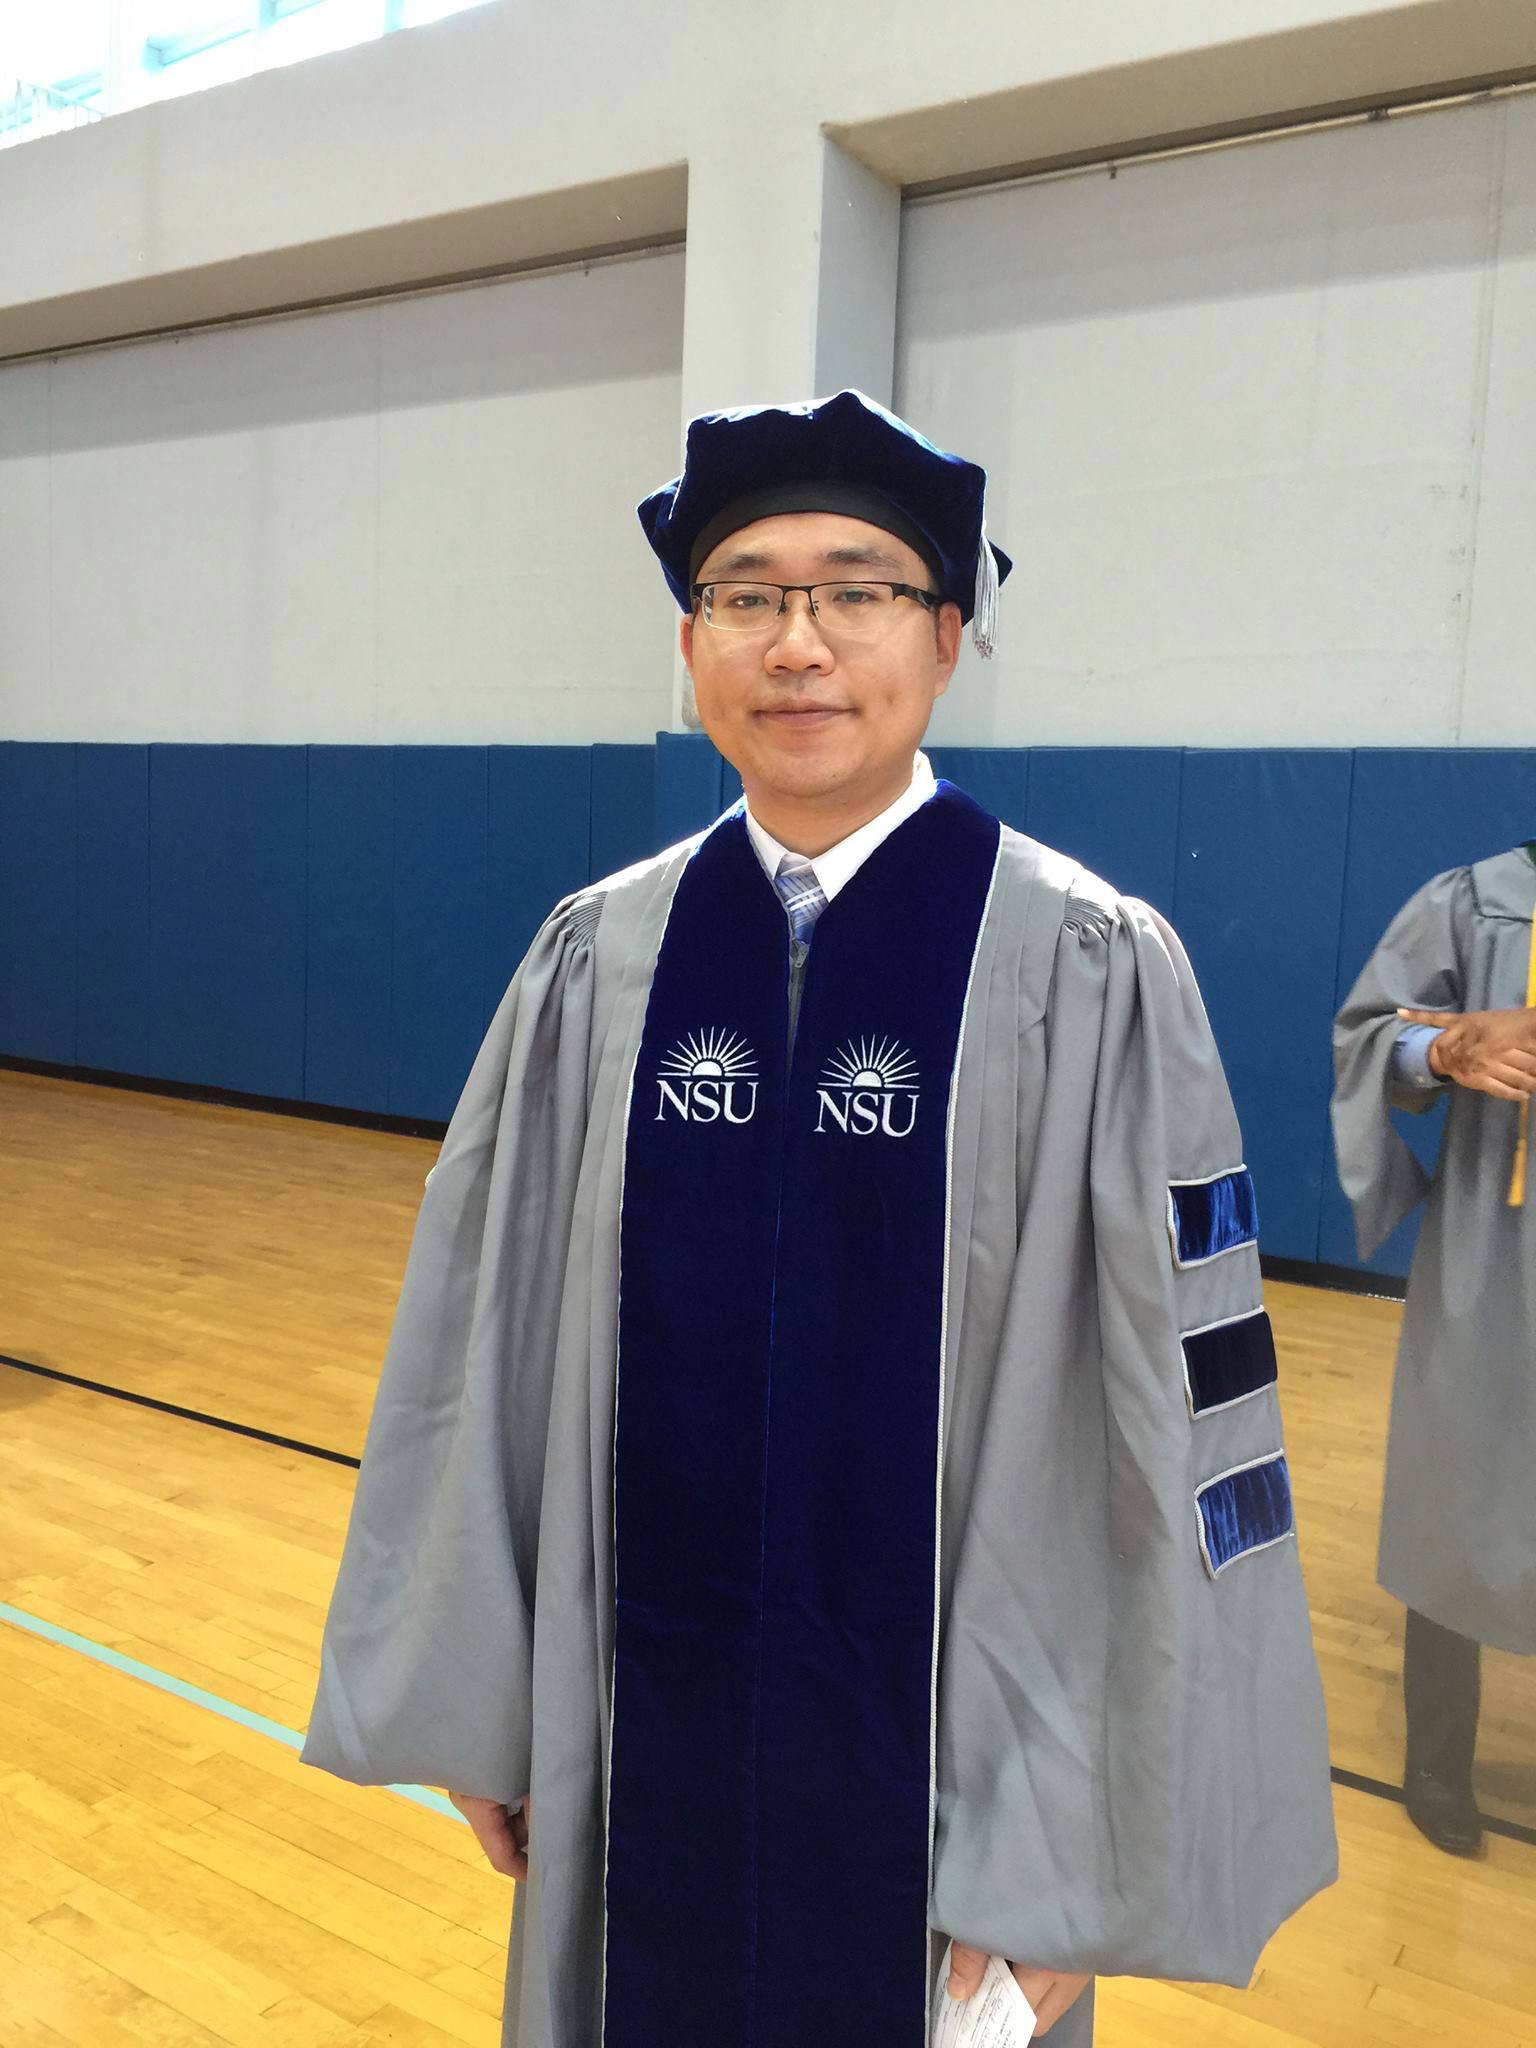 Doctor Hsia at his graduation